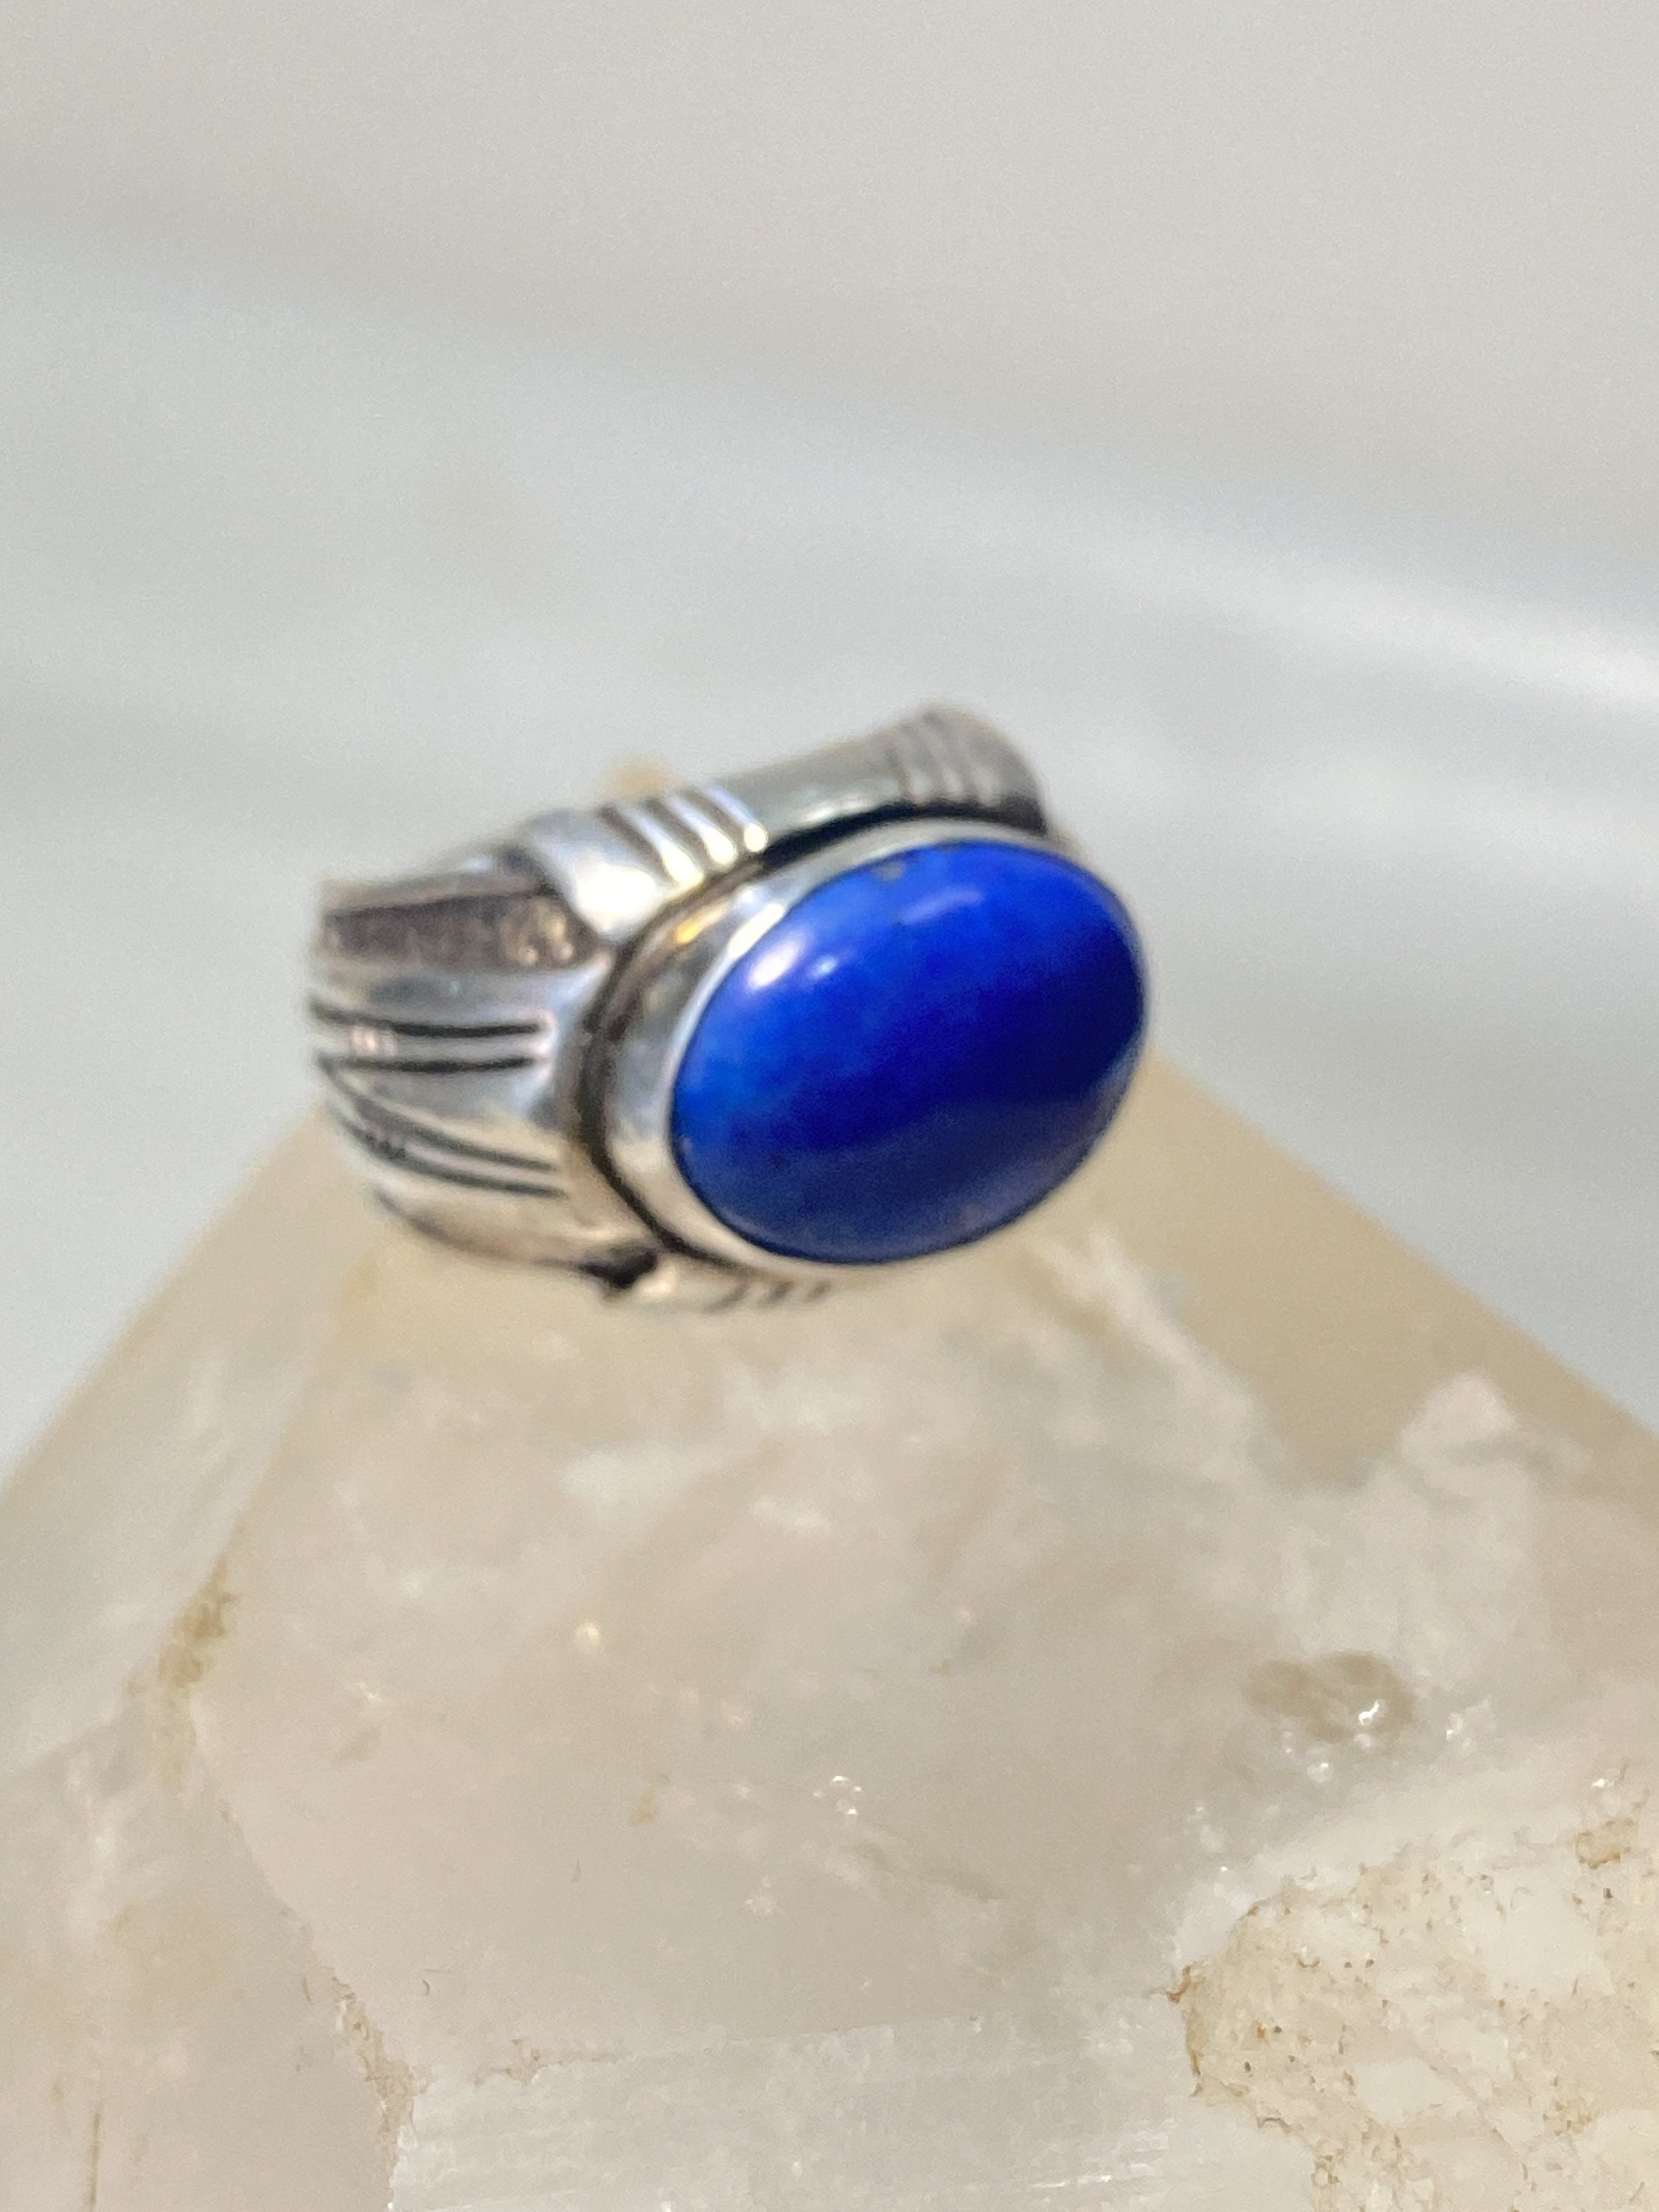 Blue Lapis Ring Solid Band Sterling Silver Women Men Size 8.50 - Etsy